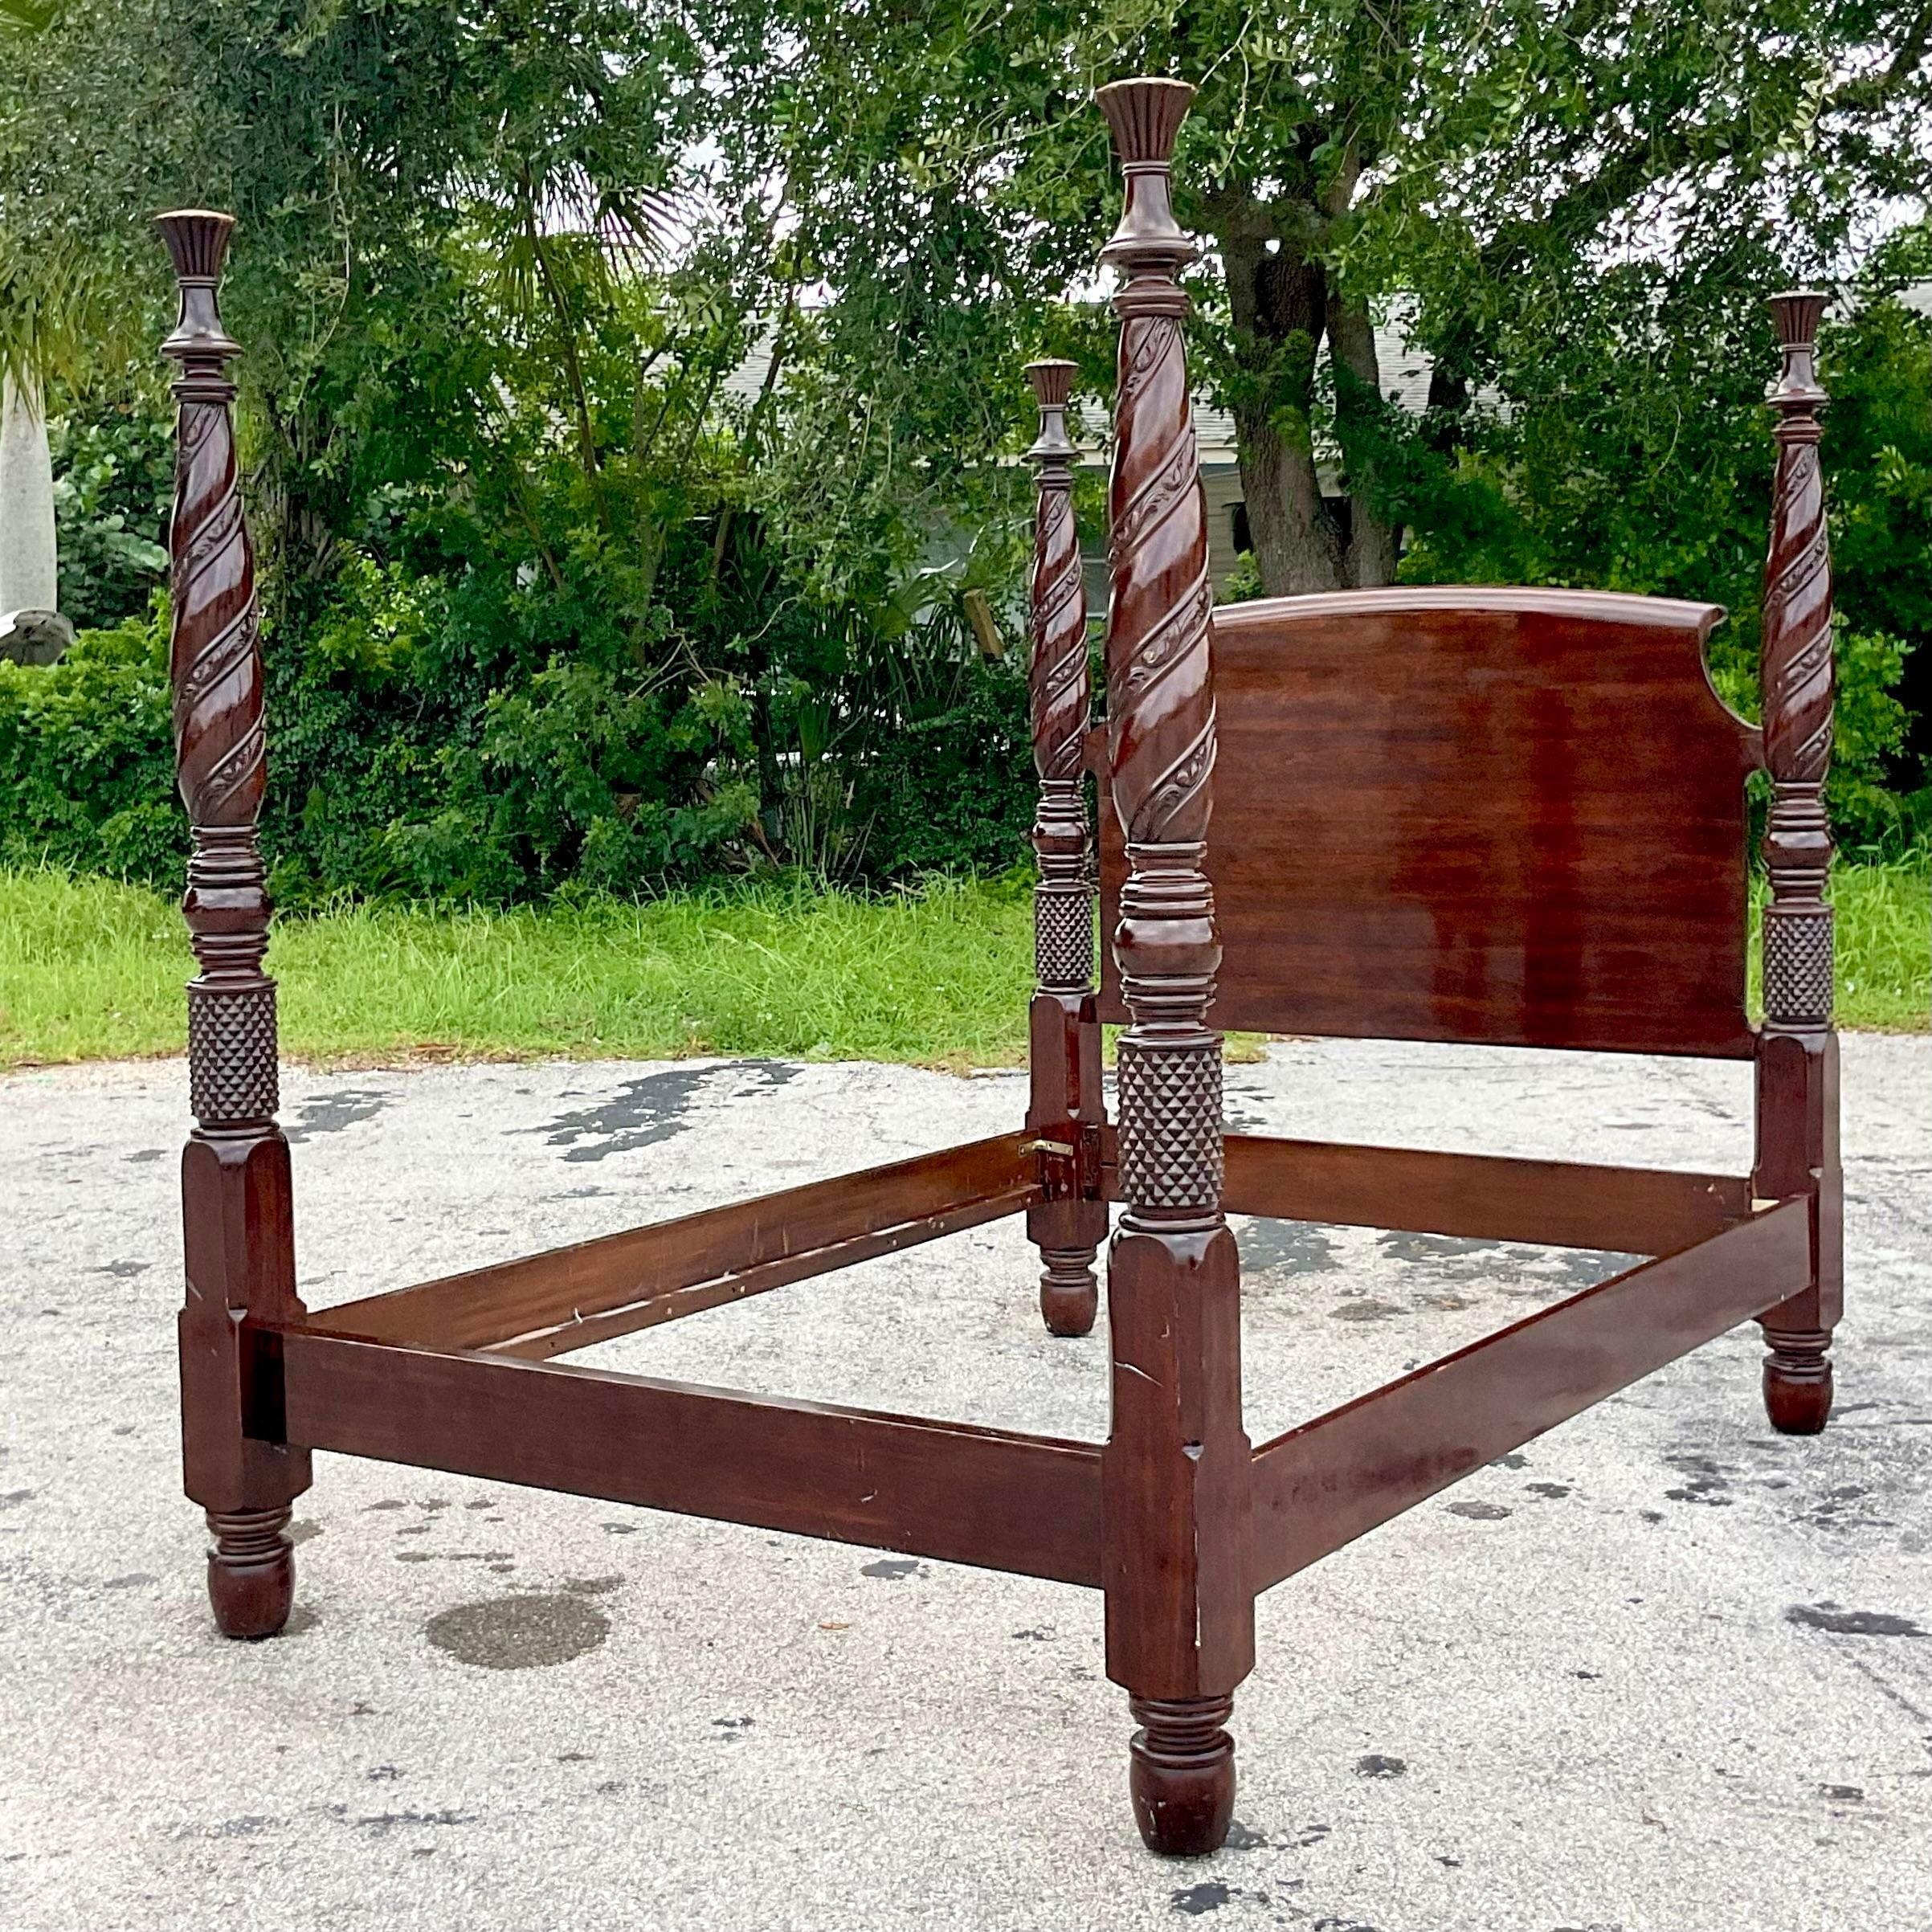 A fabulous vintage Regency Queen bed frame. A chic four posted design with hand carved vine detail. Gorgeous Mahogany wood grain detail. Acquired from a Palm Beach estate.